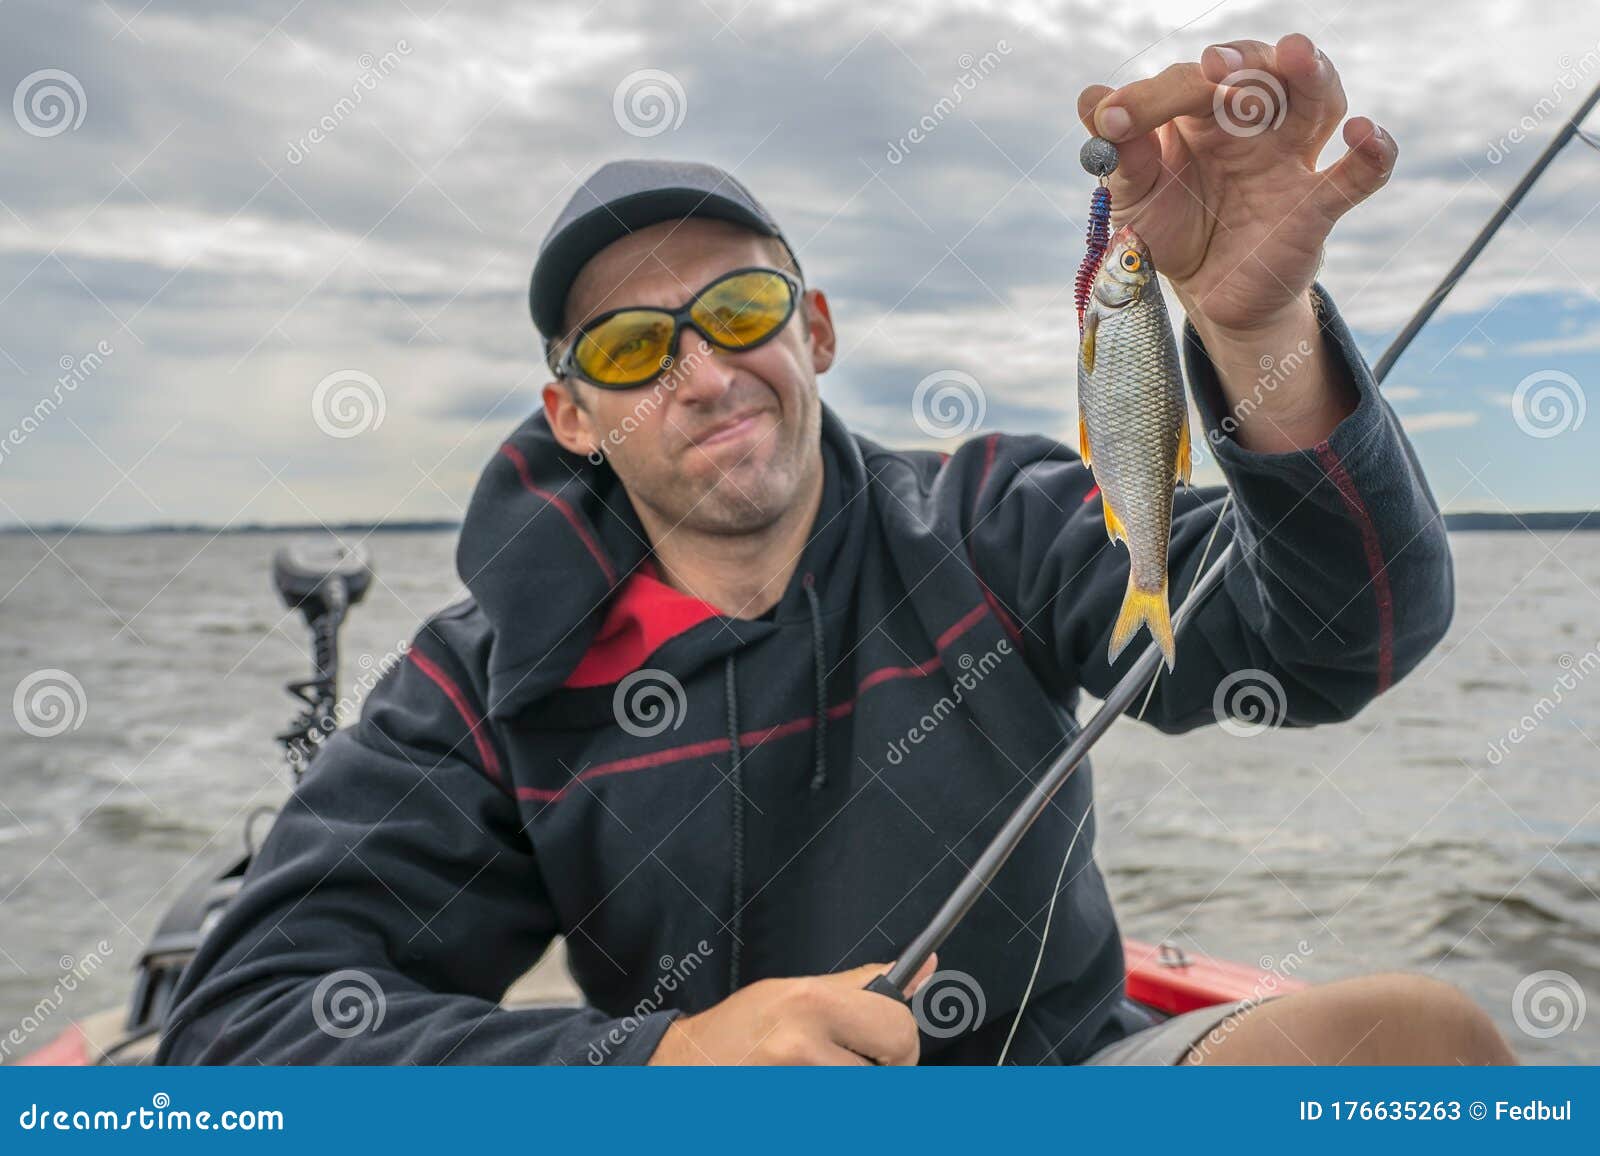 Bad Fishing. Upset Fisherman with Small Fish in Hand Stock Image